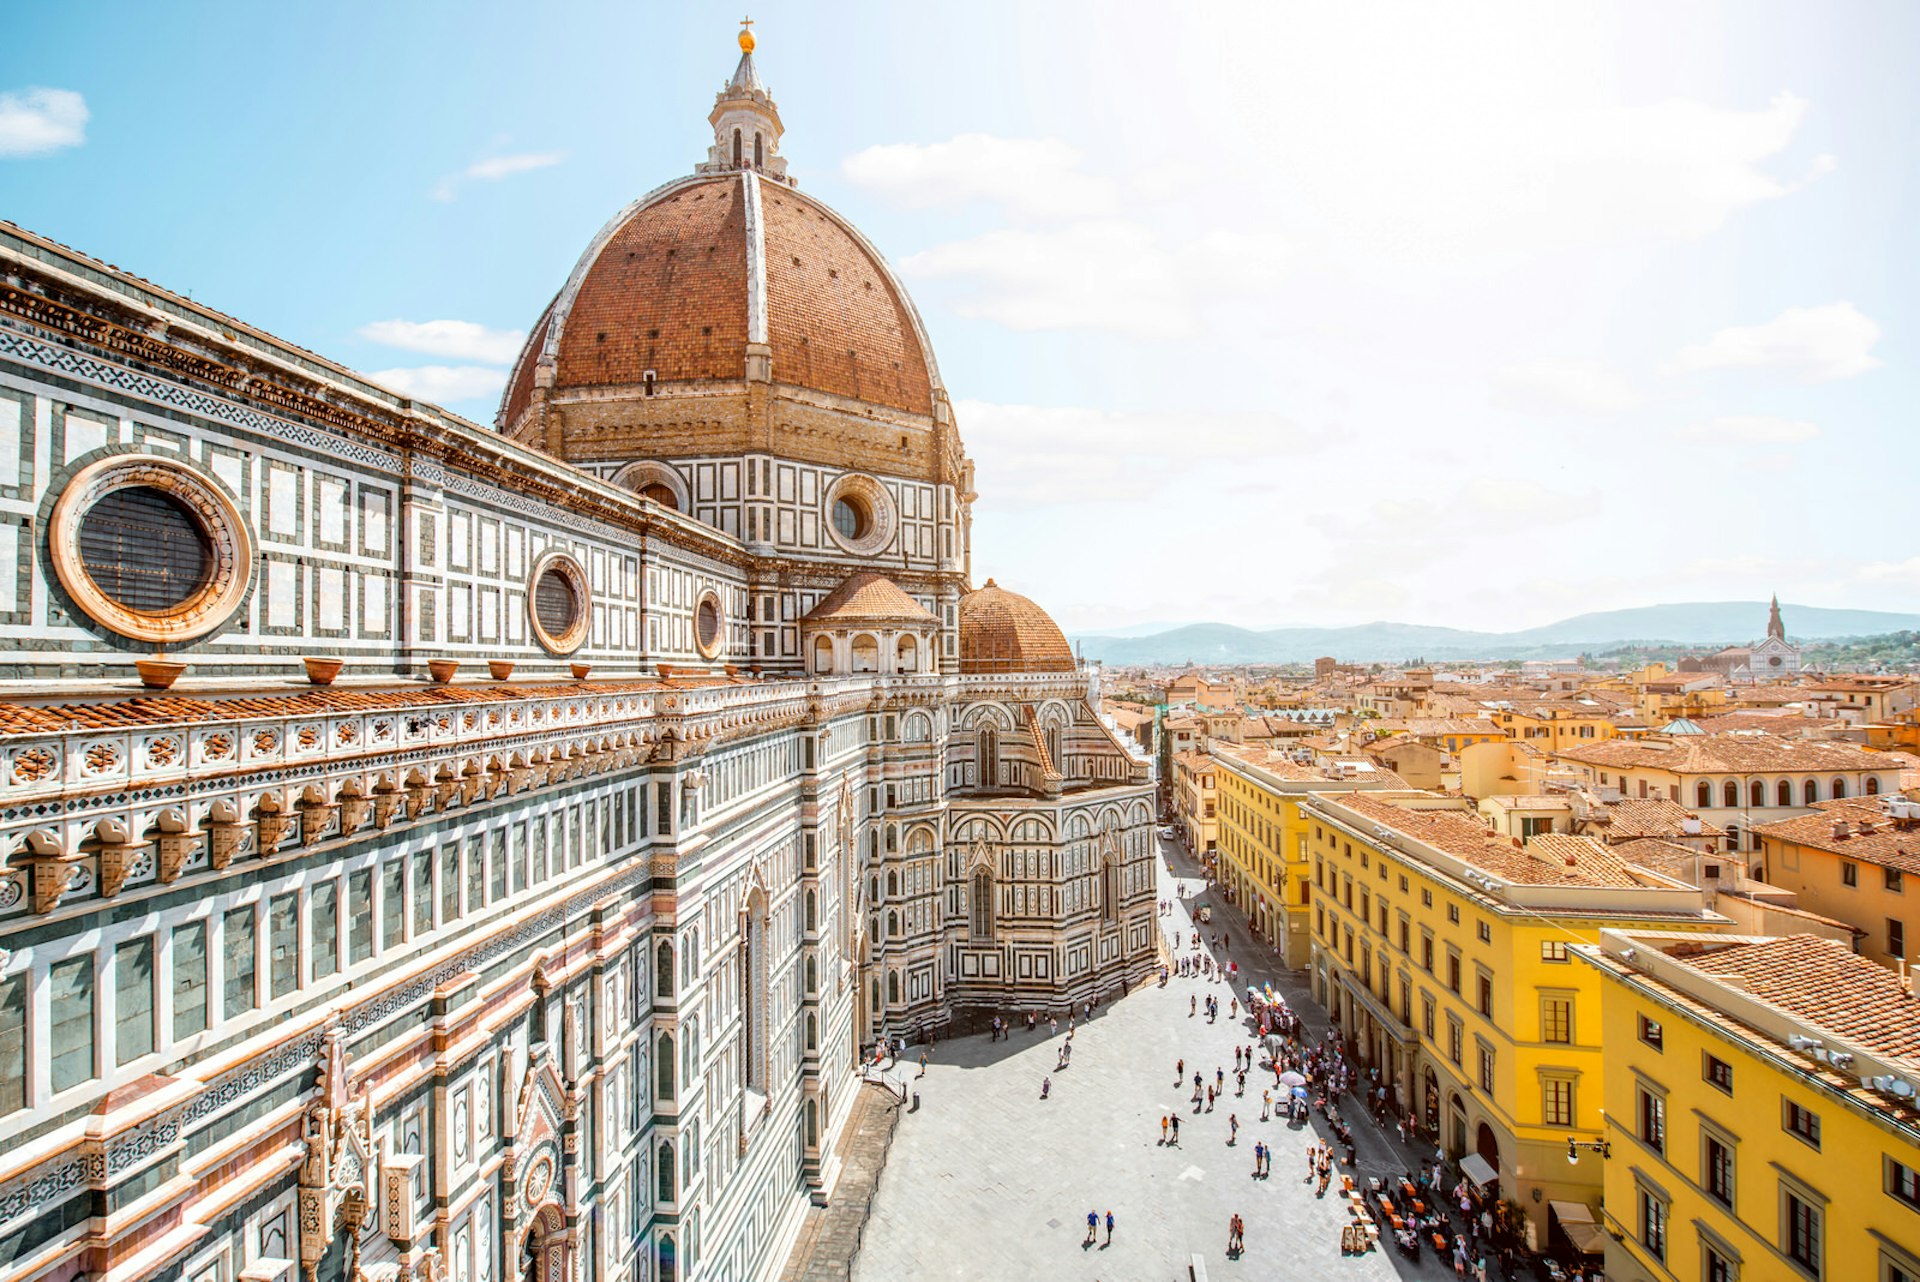 Top cityscape view on the dome of Santa Maria del Fiore church and old town in Florence; the wide streets are perfect for strollers and travel with your baby